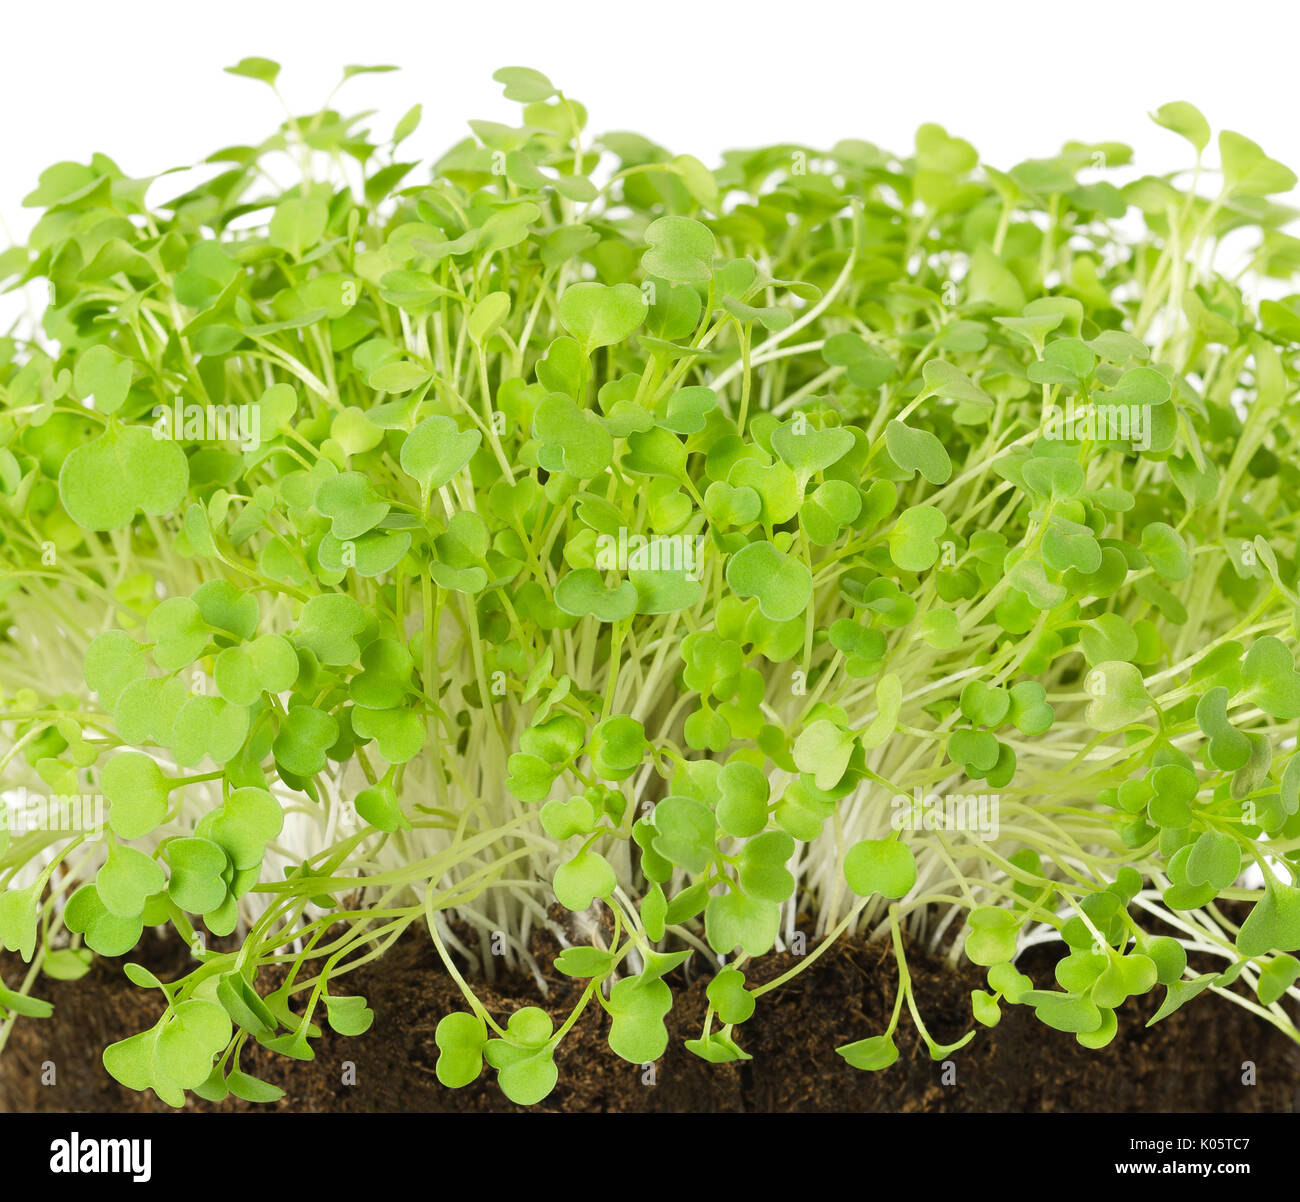 Rocket salad, fresh sprouts and young leaves front view over white. Salad vegetable and microgreen. Also known as arugula, rucola or rugula. Stock Photo